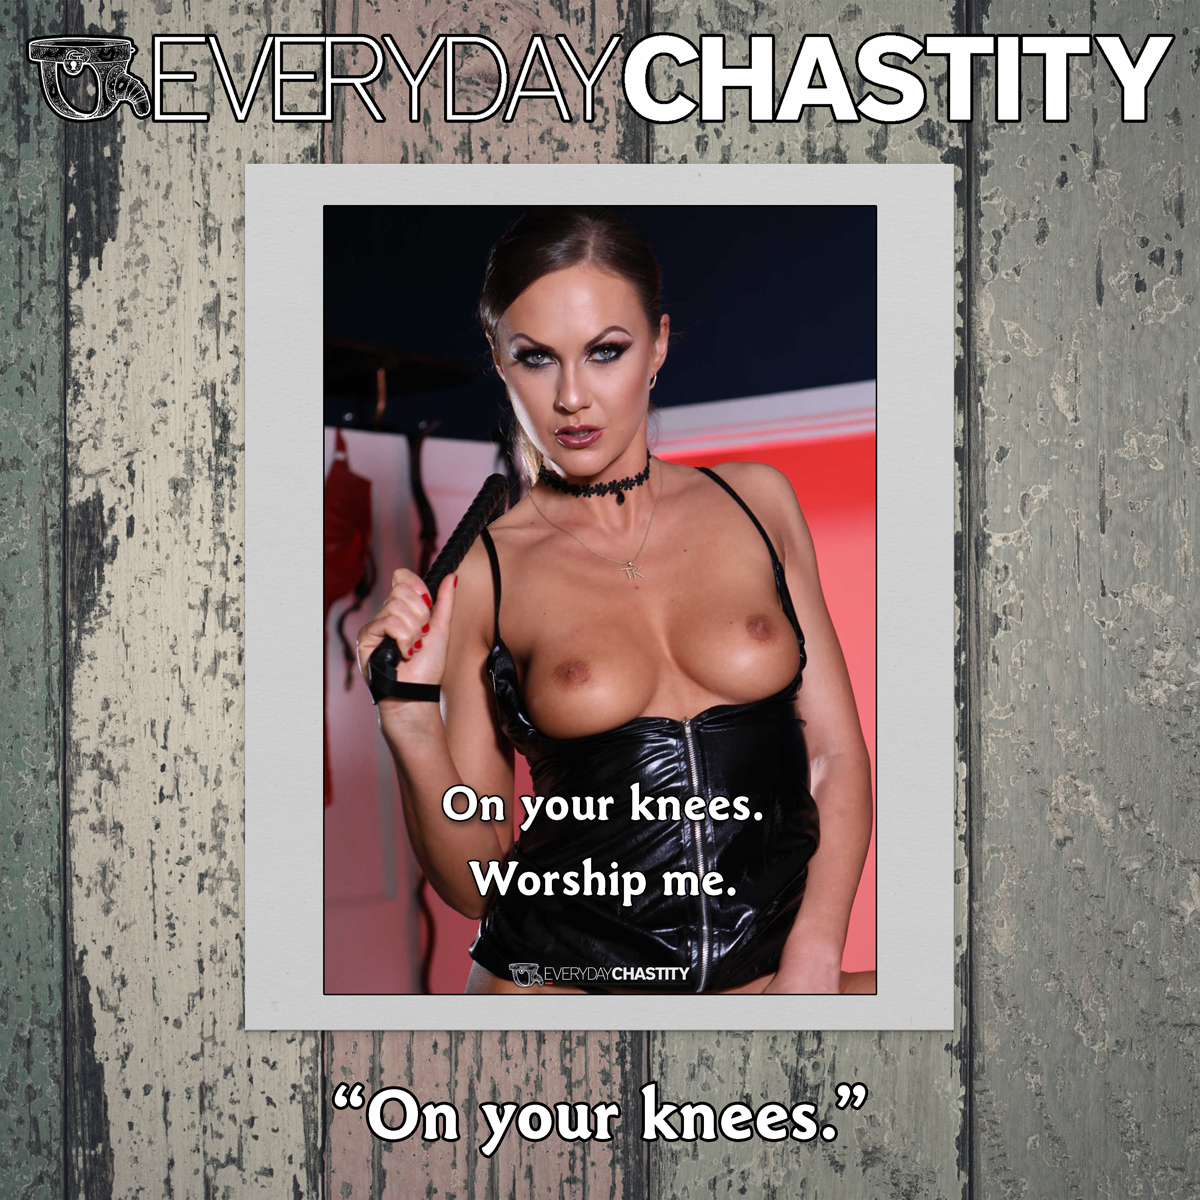 On your knees.